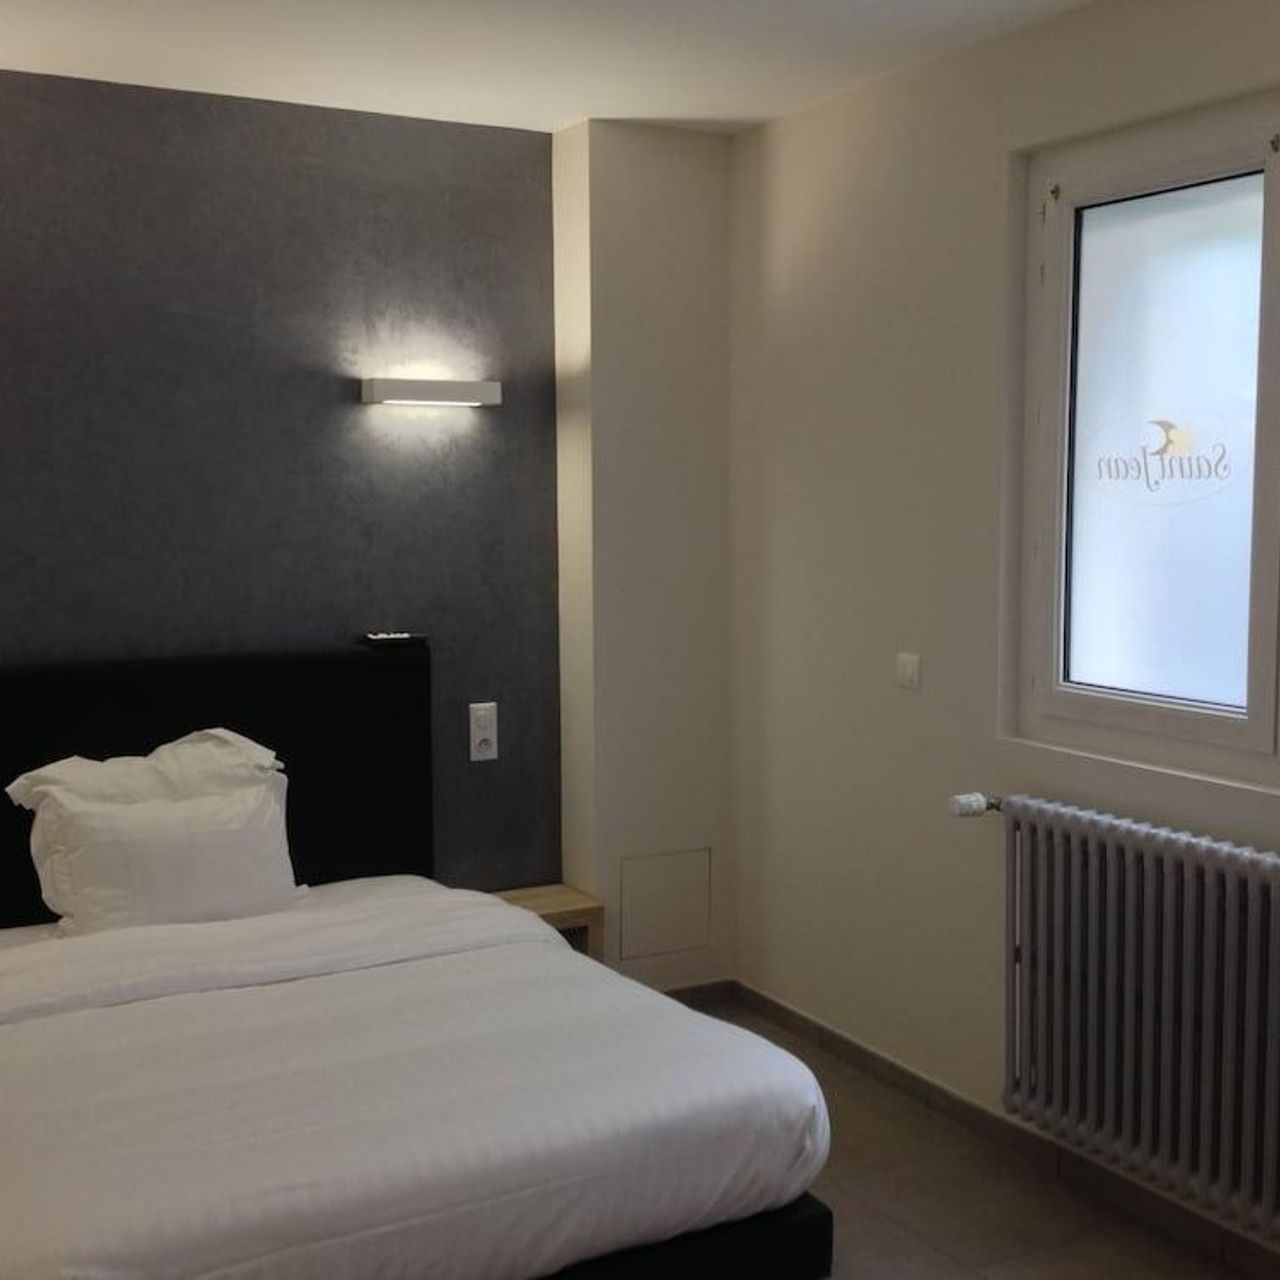 Hôtel Saint Jean - Bourges - Great prices at HOTEL INFO